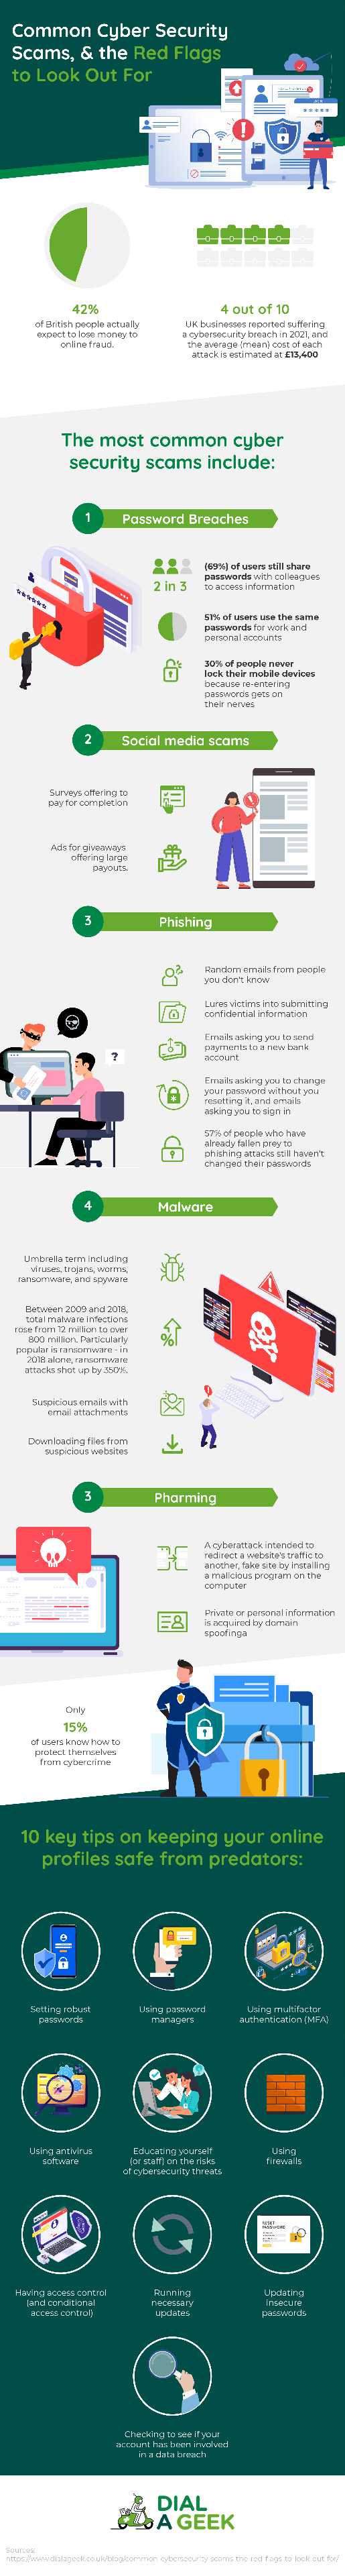 Common Cyber Security Scam & the Red Flags to Look Out for